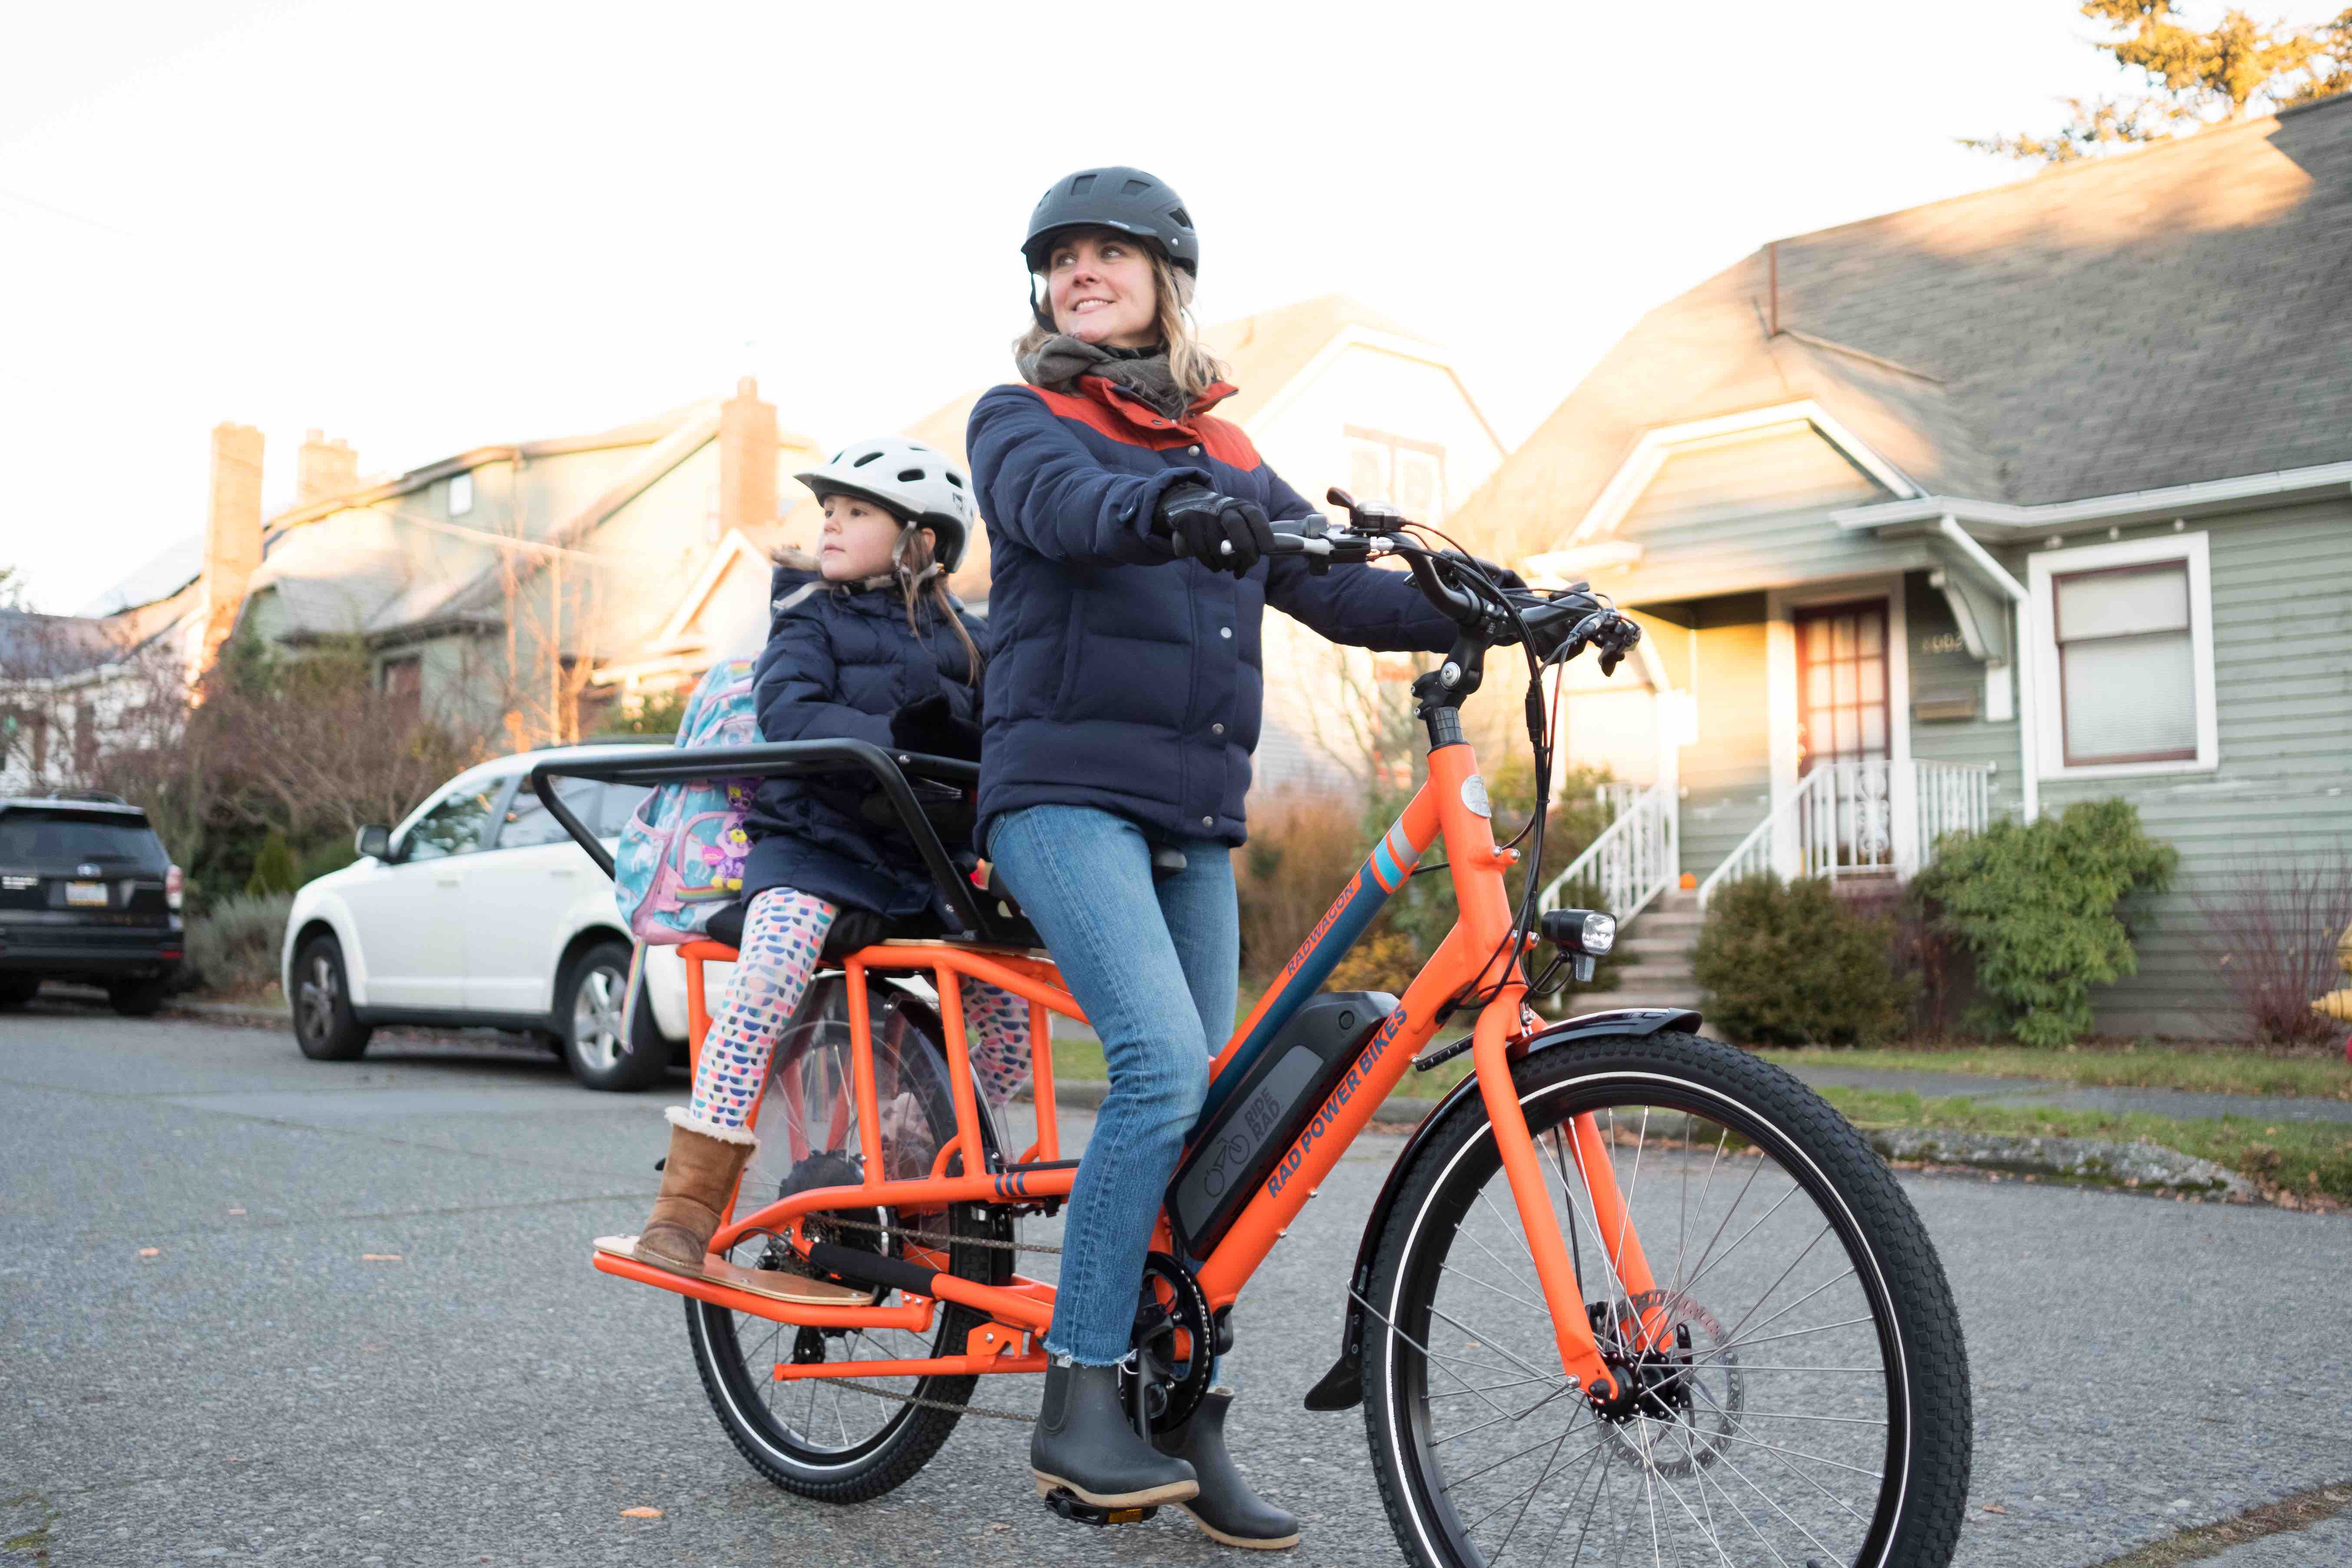 A mother rides with her child on a RadWagon.